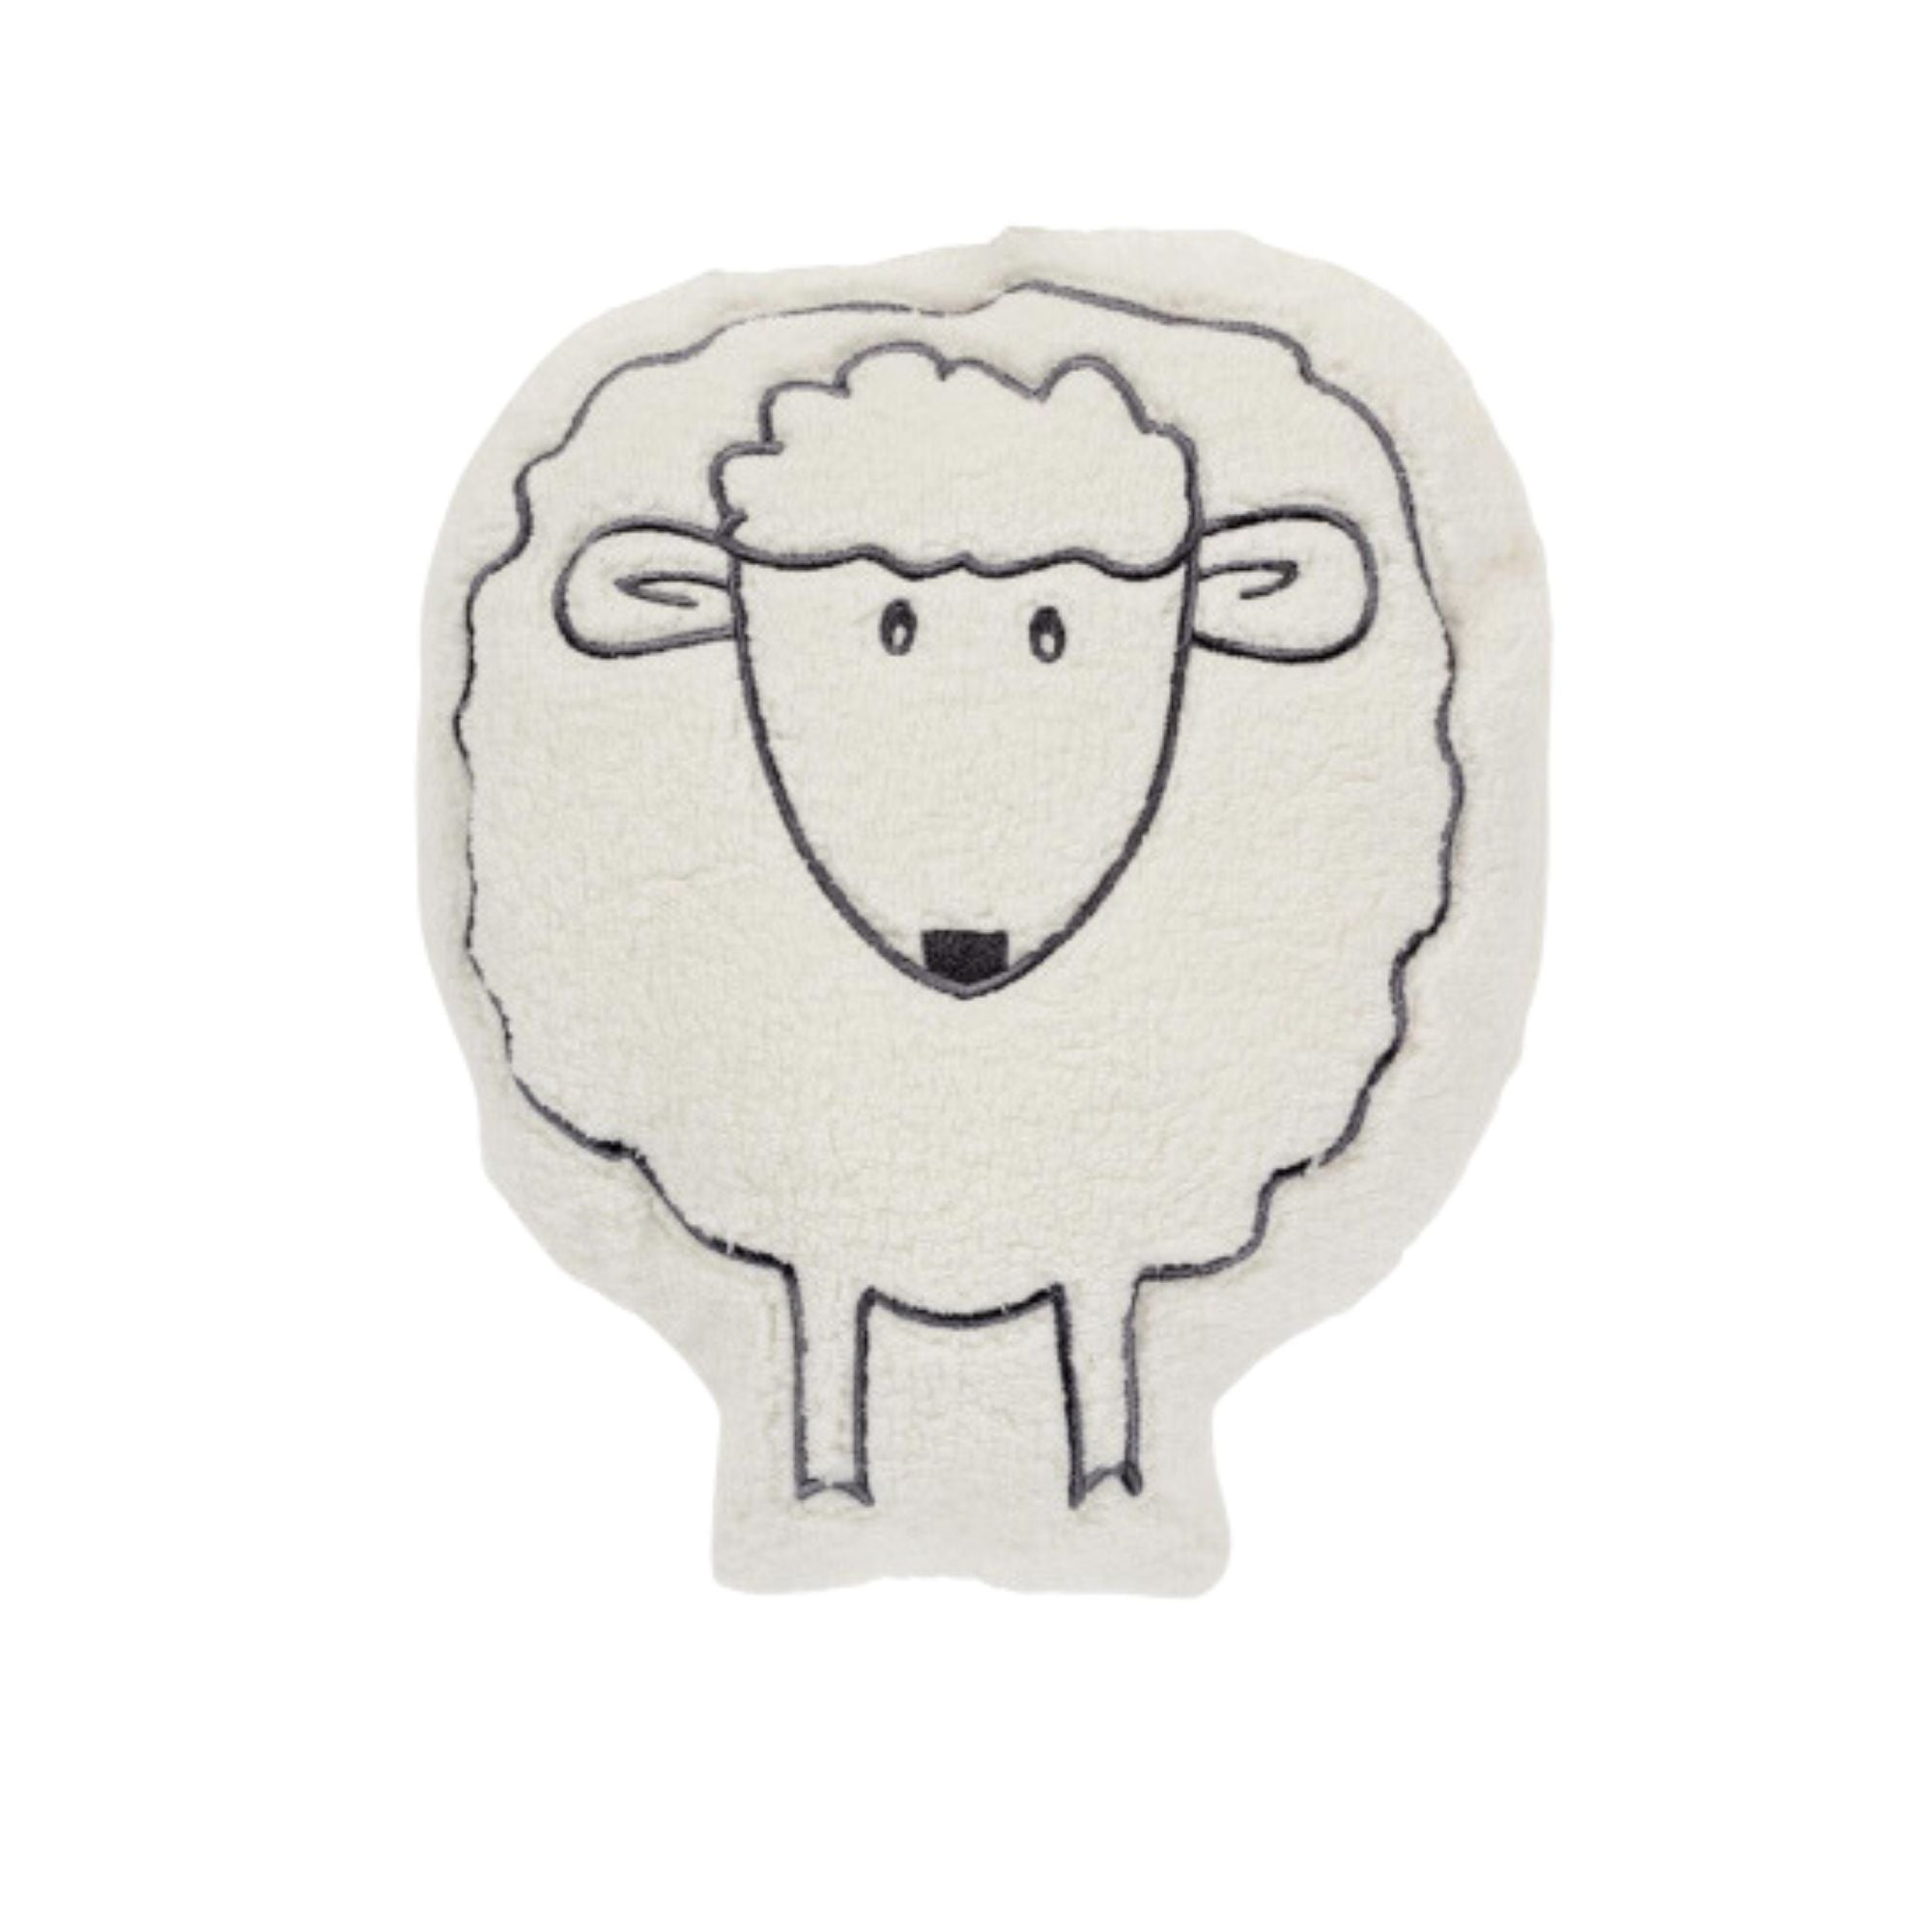 0.8 Litre Fashy Hot Water Bottle with Dolly The Sheep Cuddly Cover